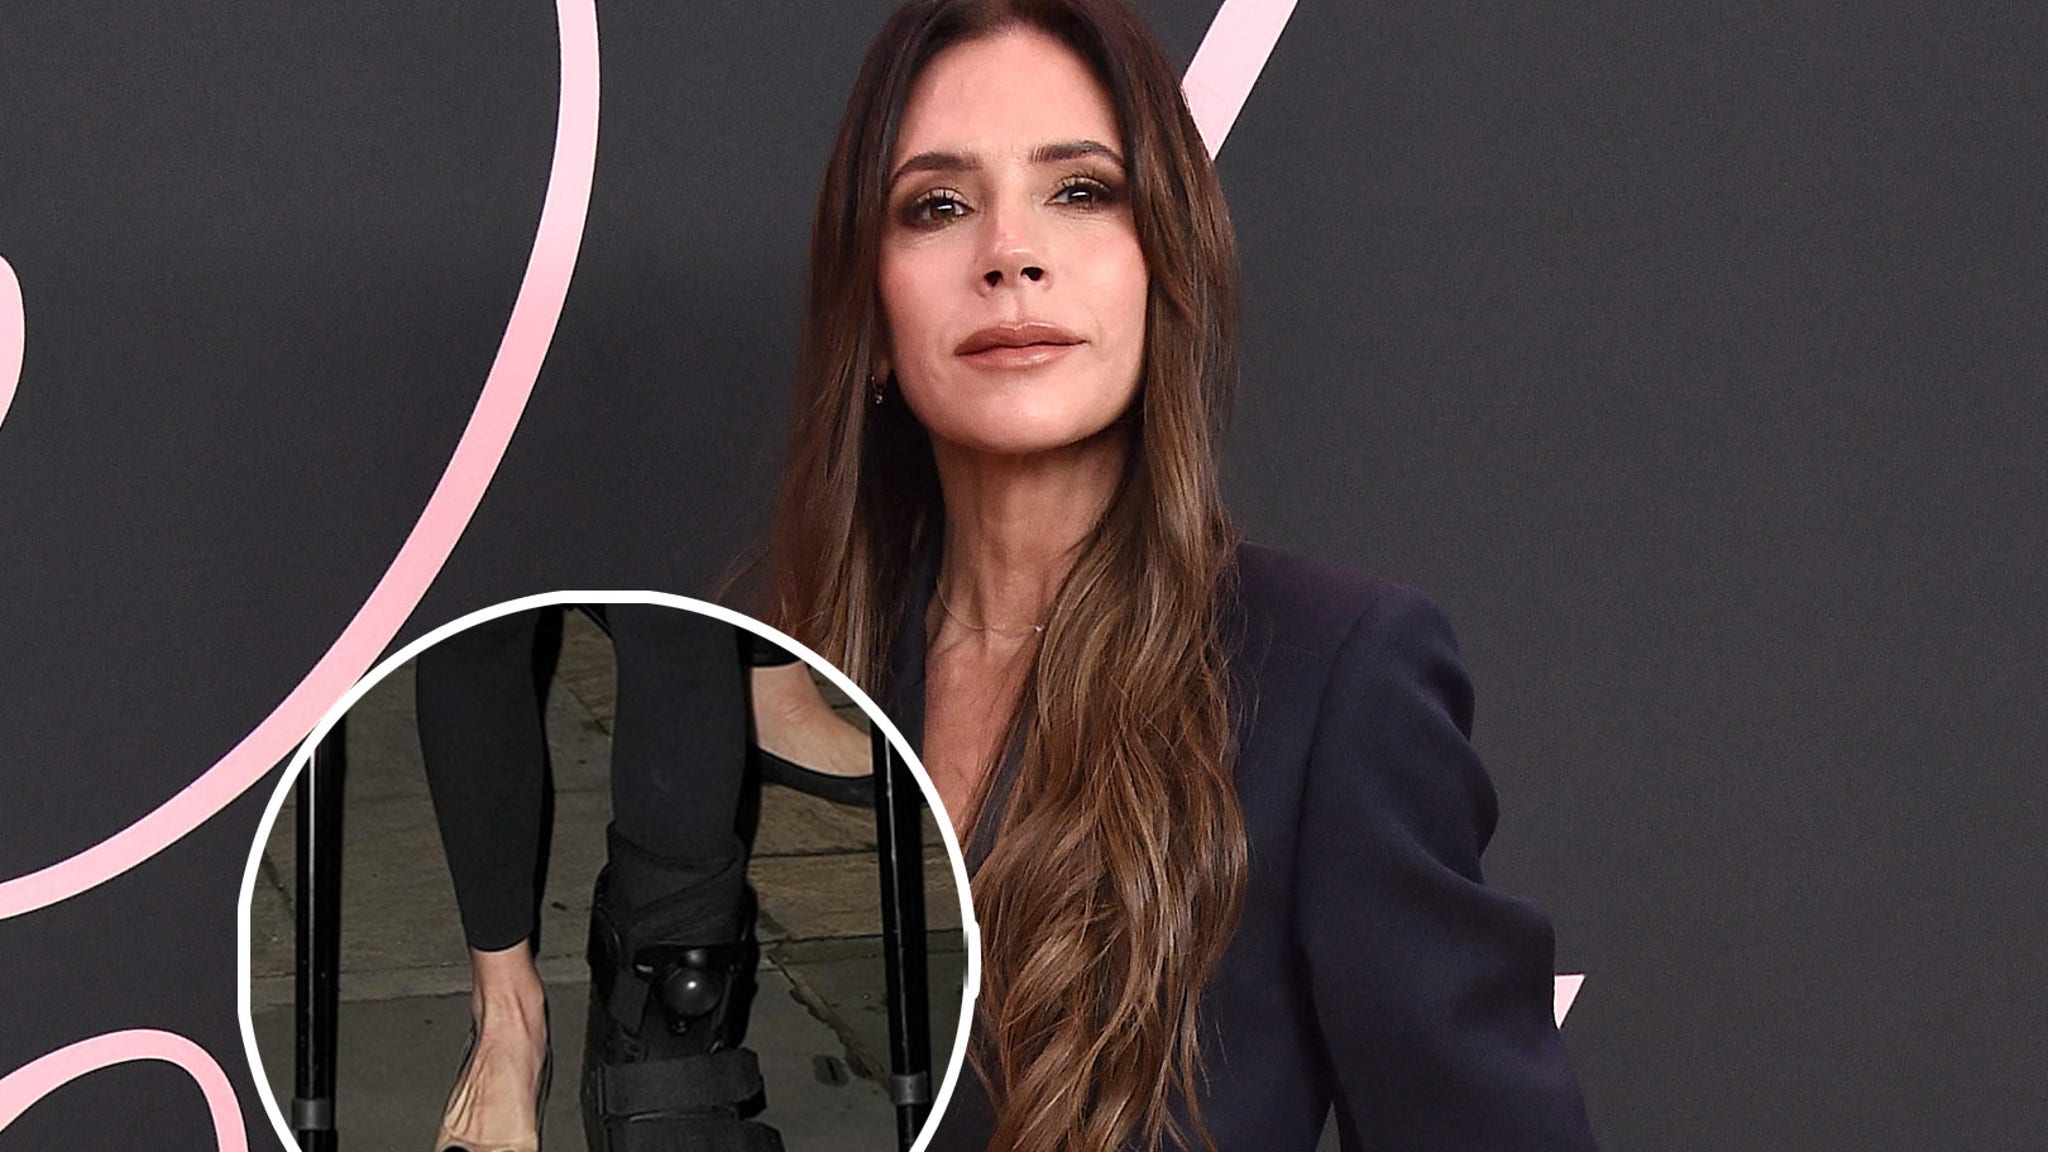 Victoria Beckham Wears One Heel While Walking on Crutches After Breaking Foot